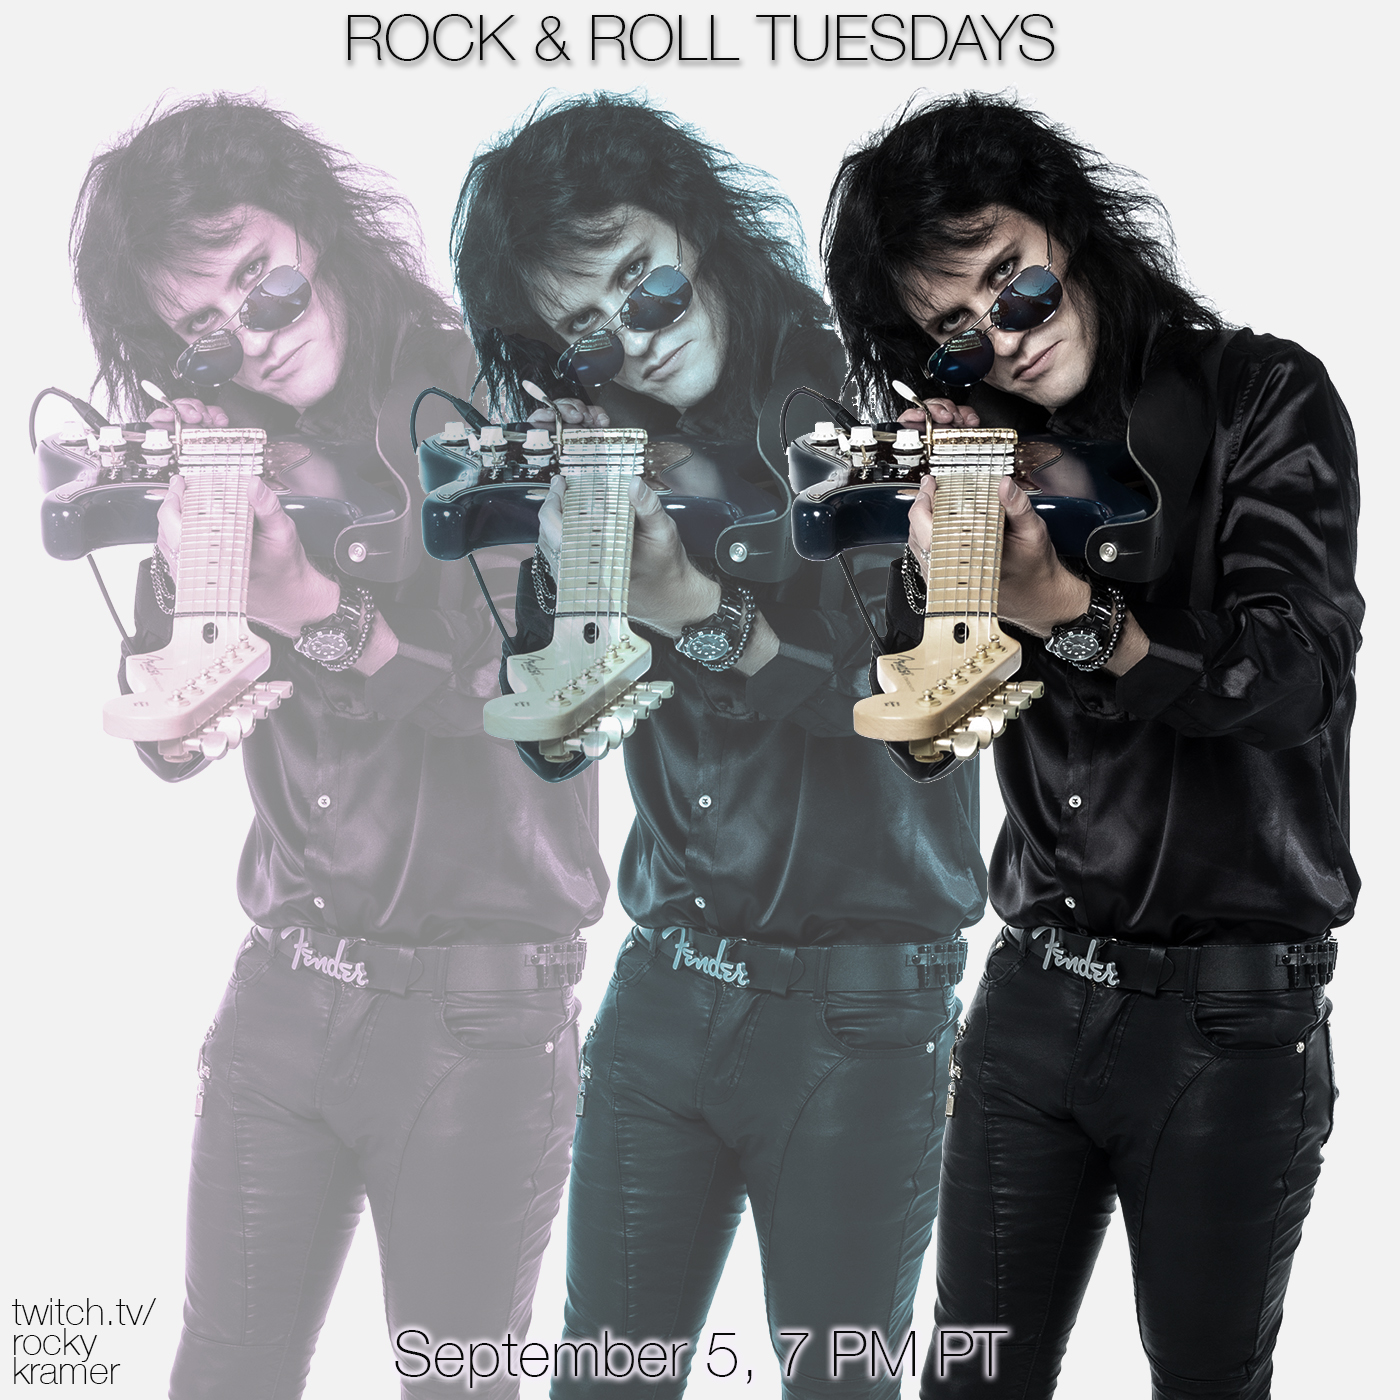 Rocky Kramer’s Rock & Roll Tuesdays Presents “Here I Go Again” Tuesday 9/5/23, 7 PM PT on Twitch